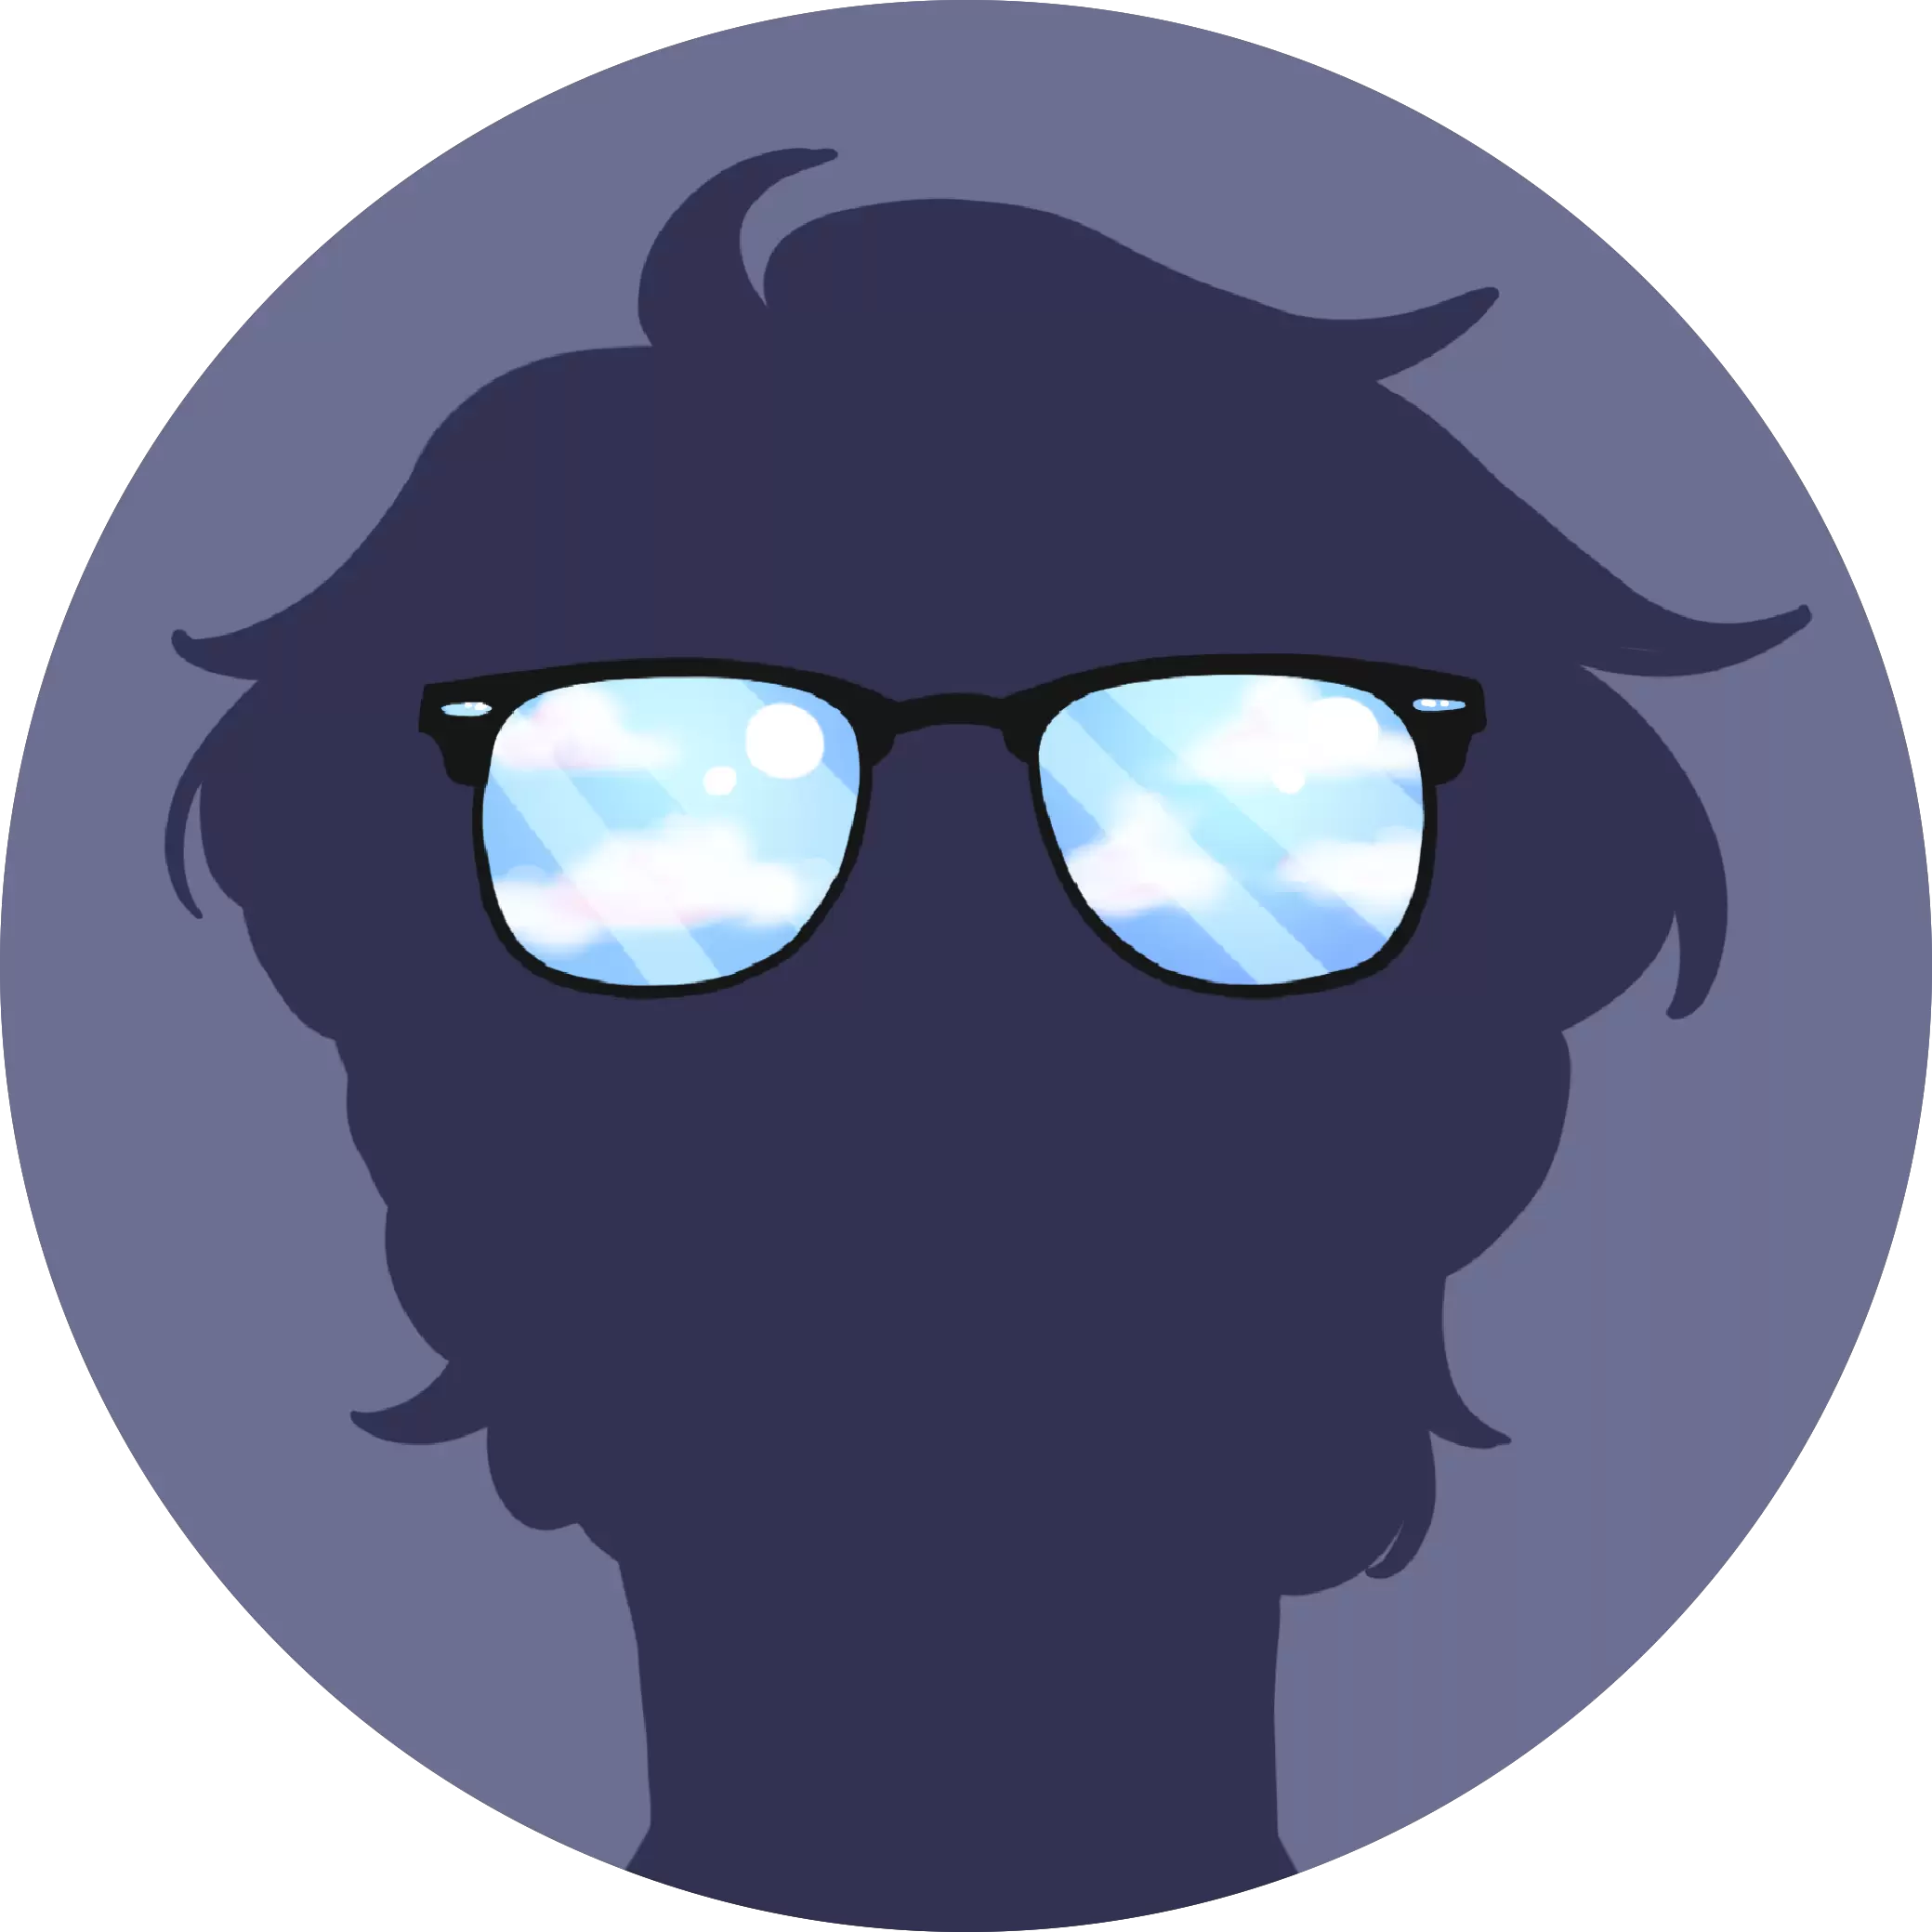 Head in the Clouds 0.1.0 Extension for Visual Studio Code